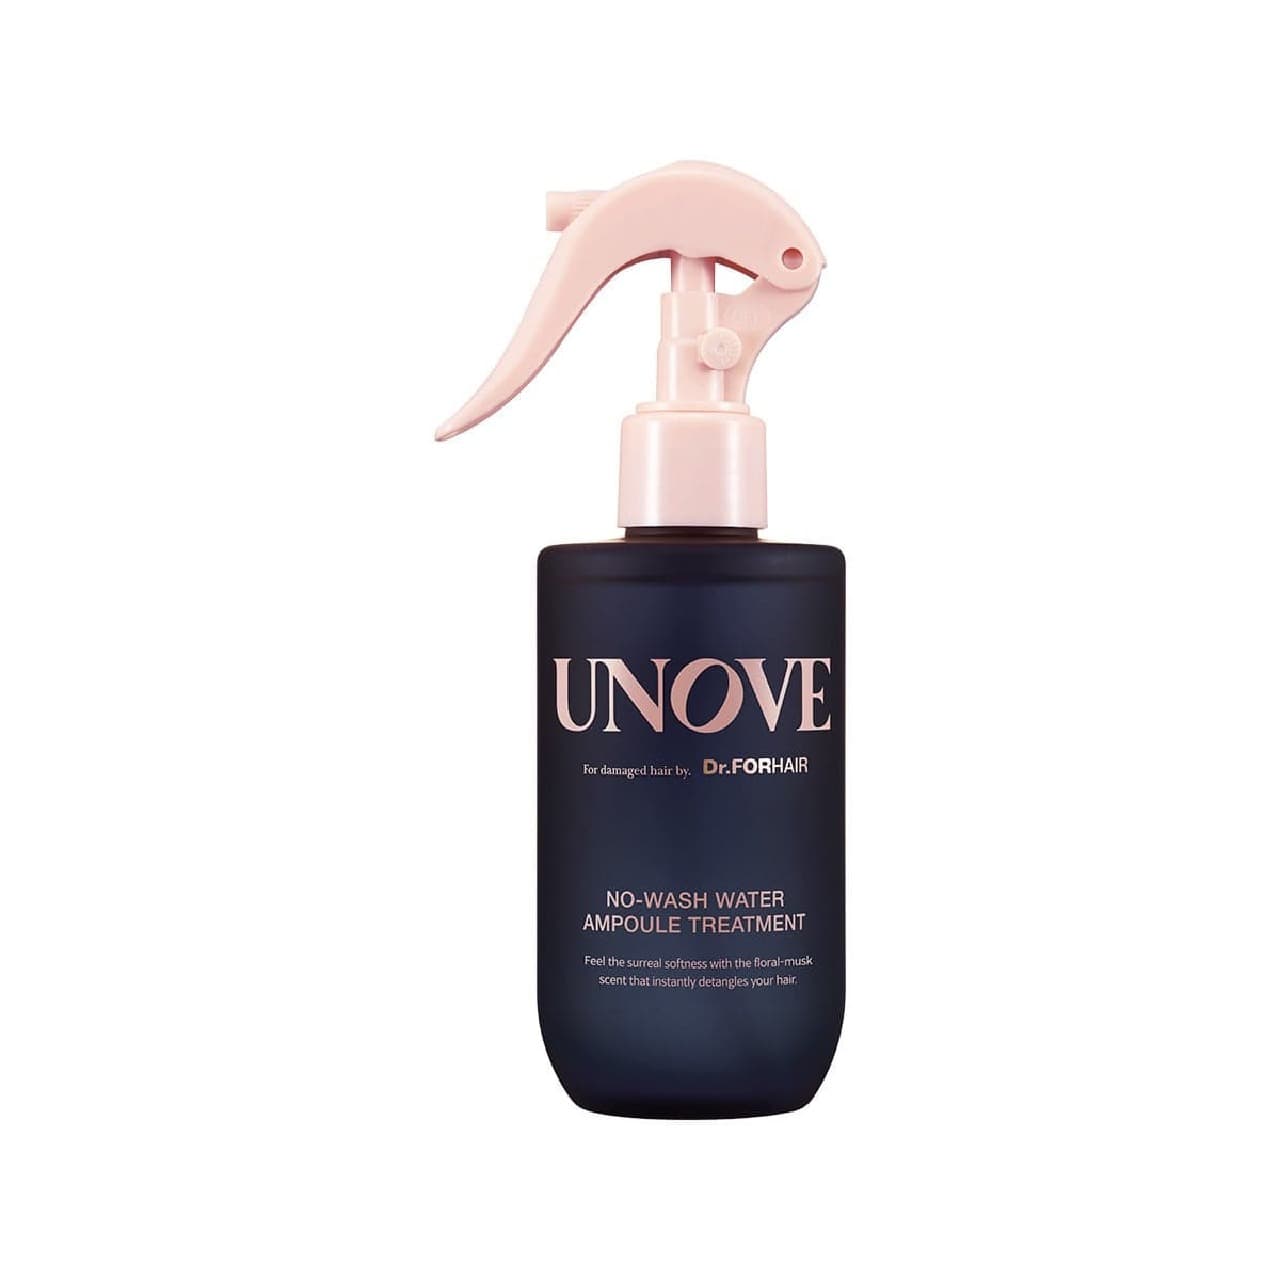 Wyatt Co., Ltd. launches "UNOVE," a hair care brand from Korea, for the first time in Japan, with a total of 11 products, including limited editions, on April 10. image 3